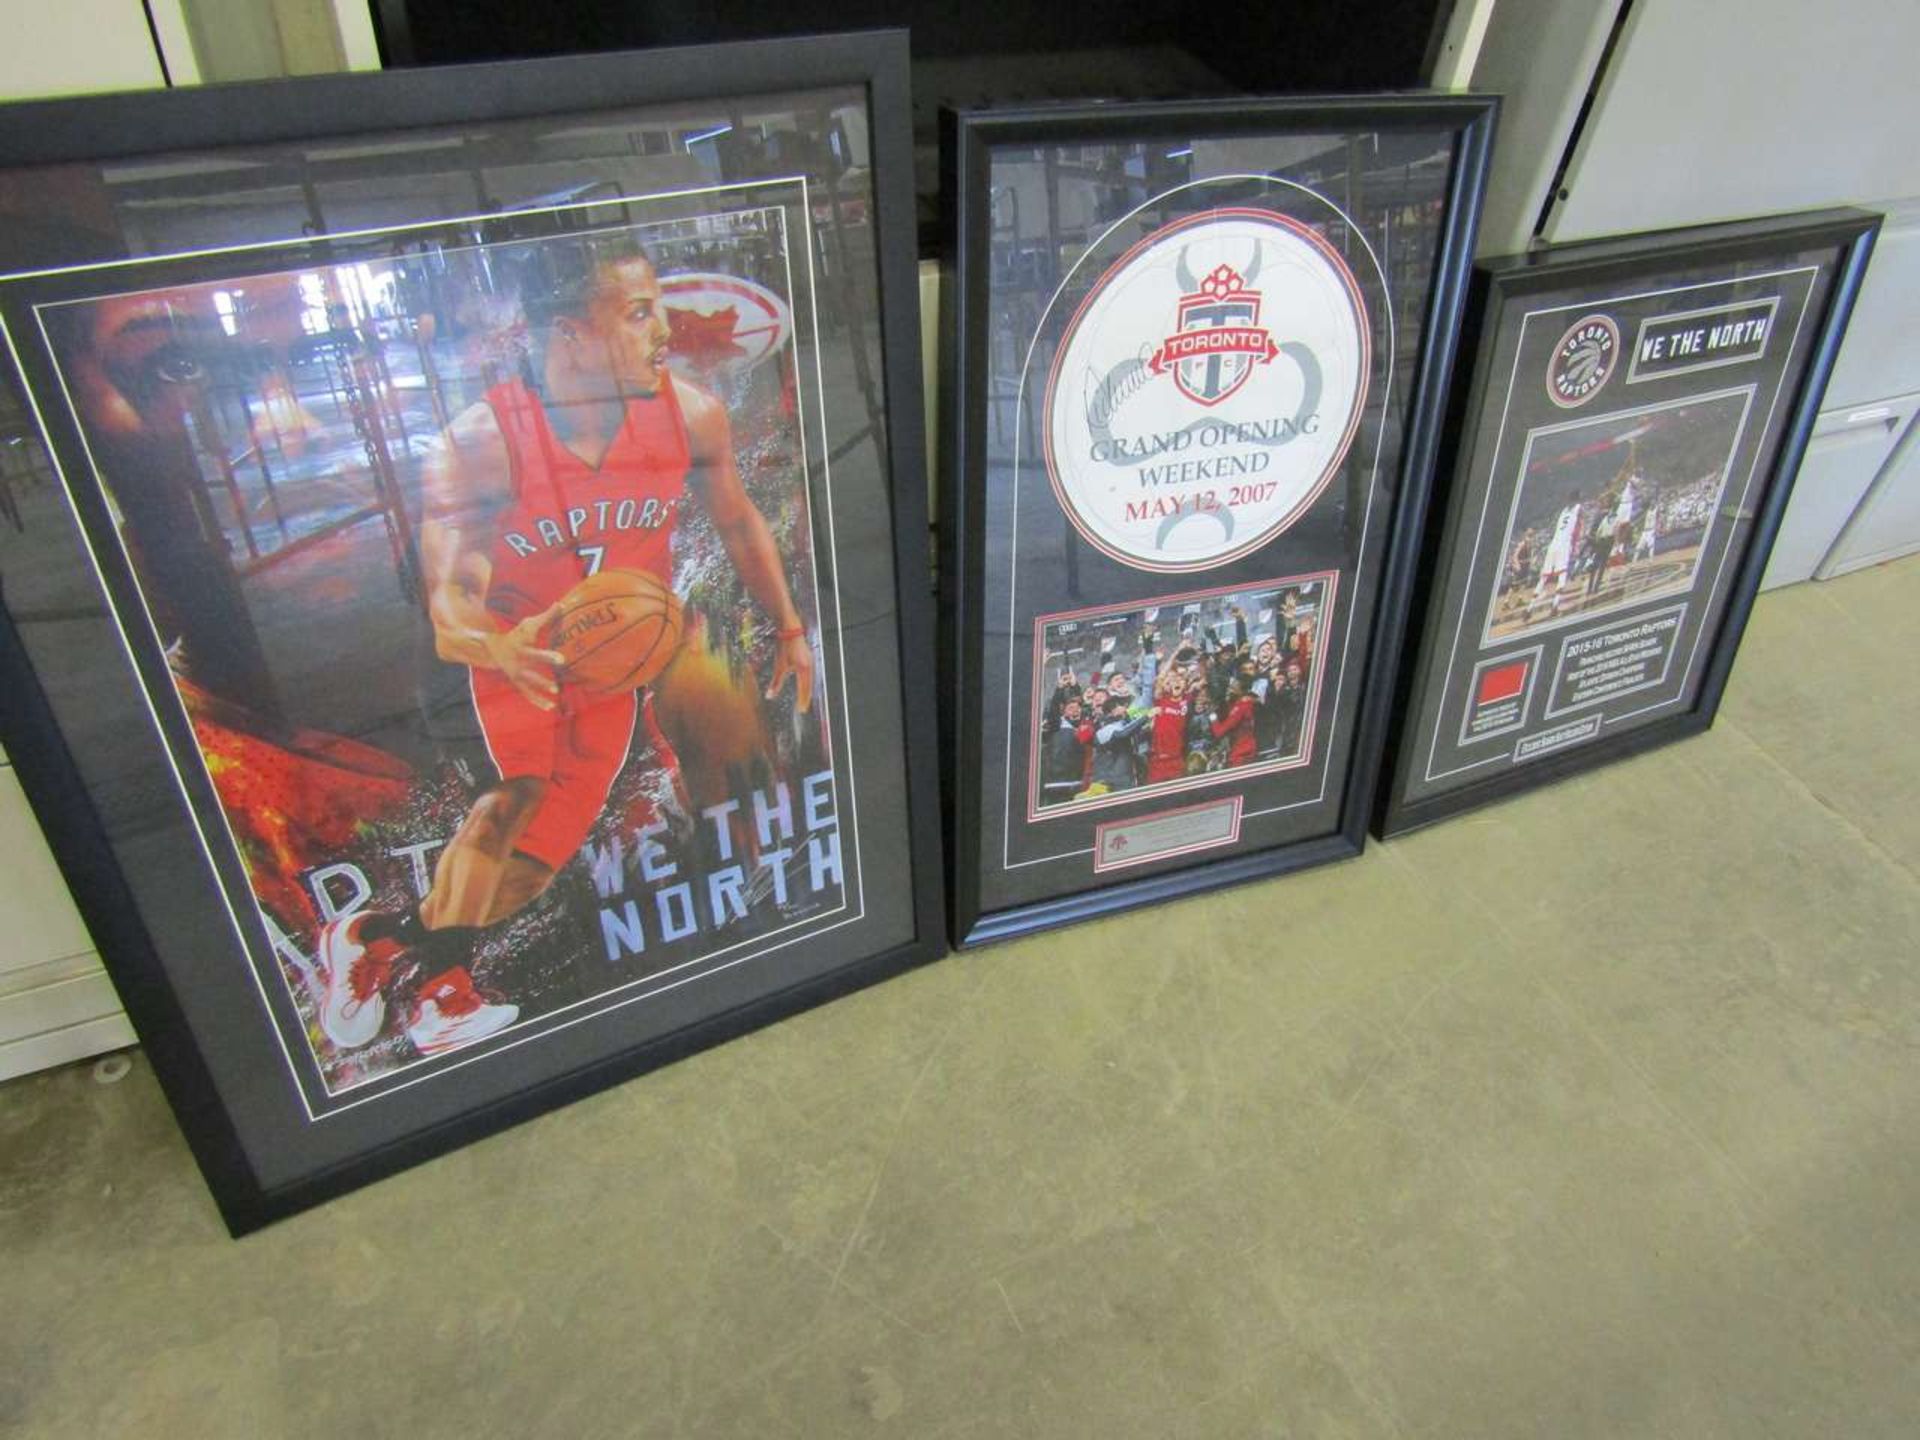 3 framed Toronto Raptors\TFC photos with autographs, boxing gloves